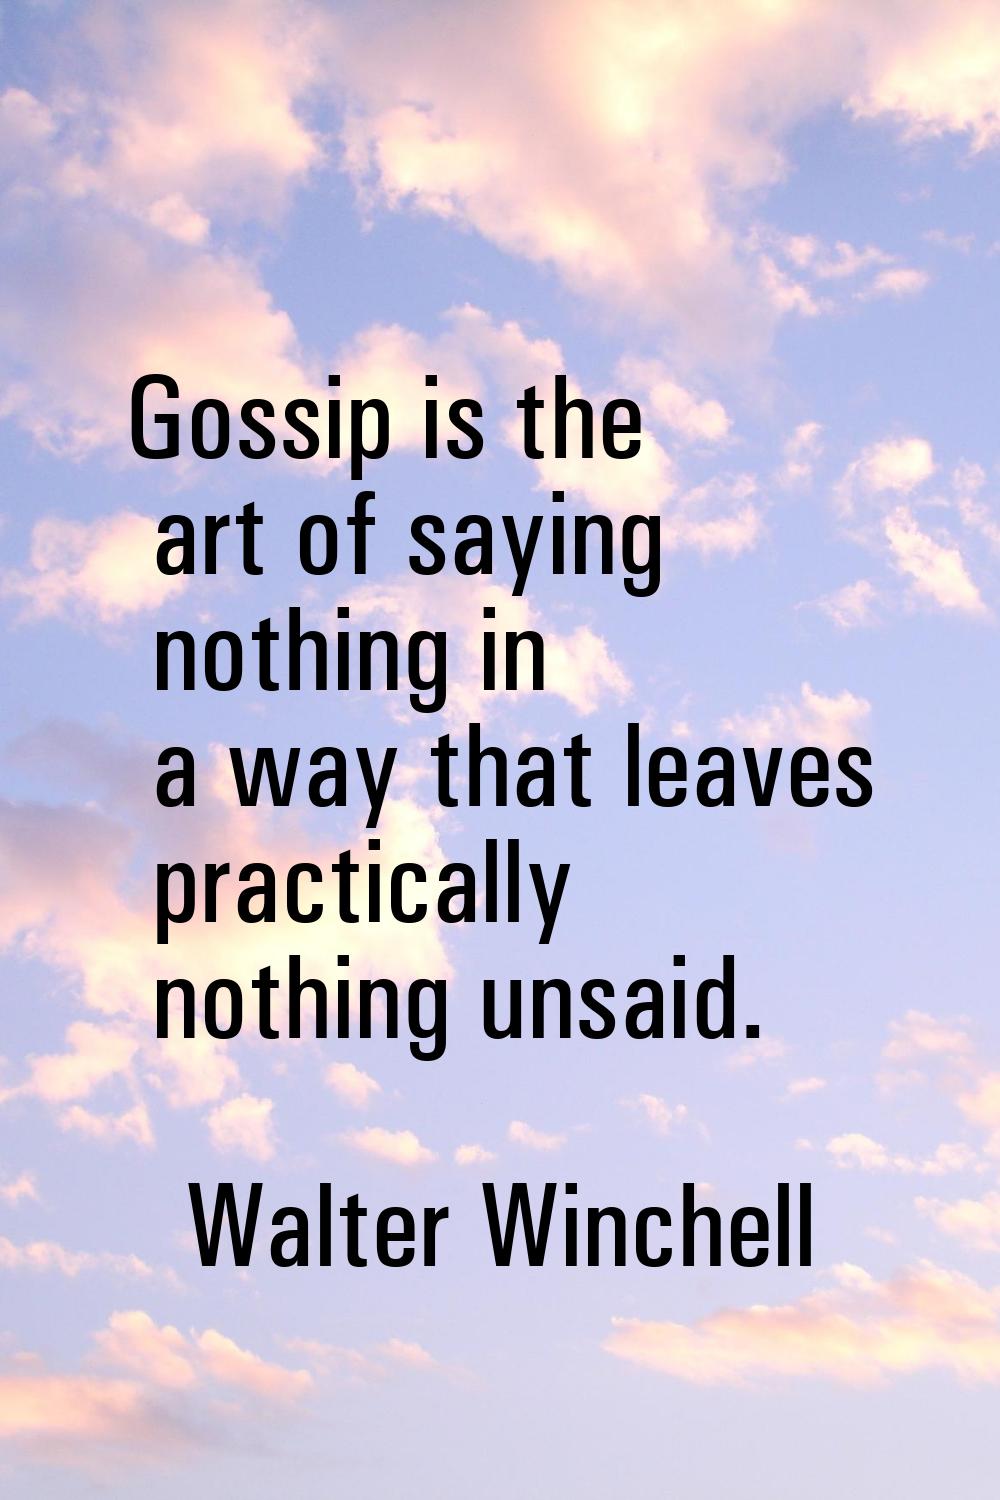 Gossip is the art of saying nothing in a way that leaves practically nothing unsaid.